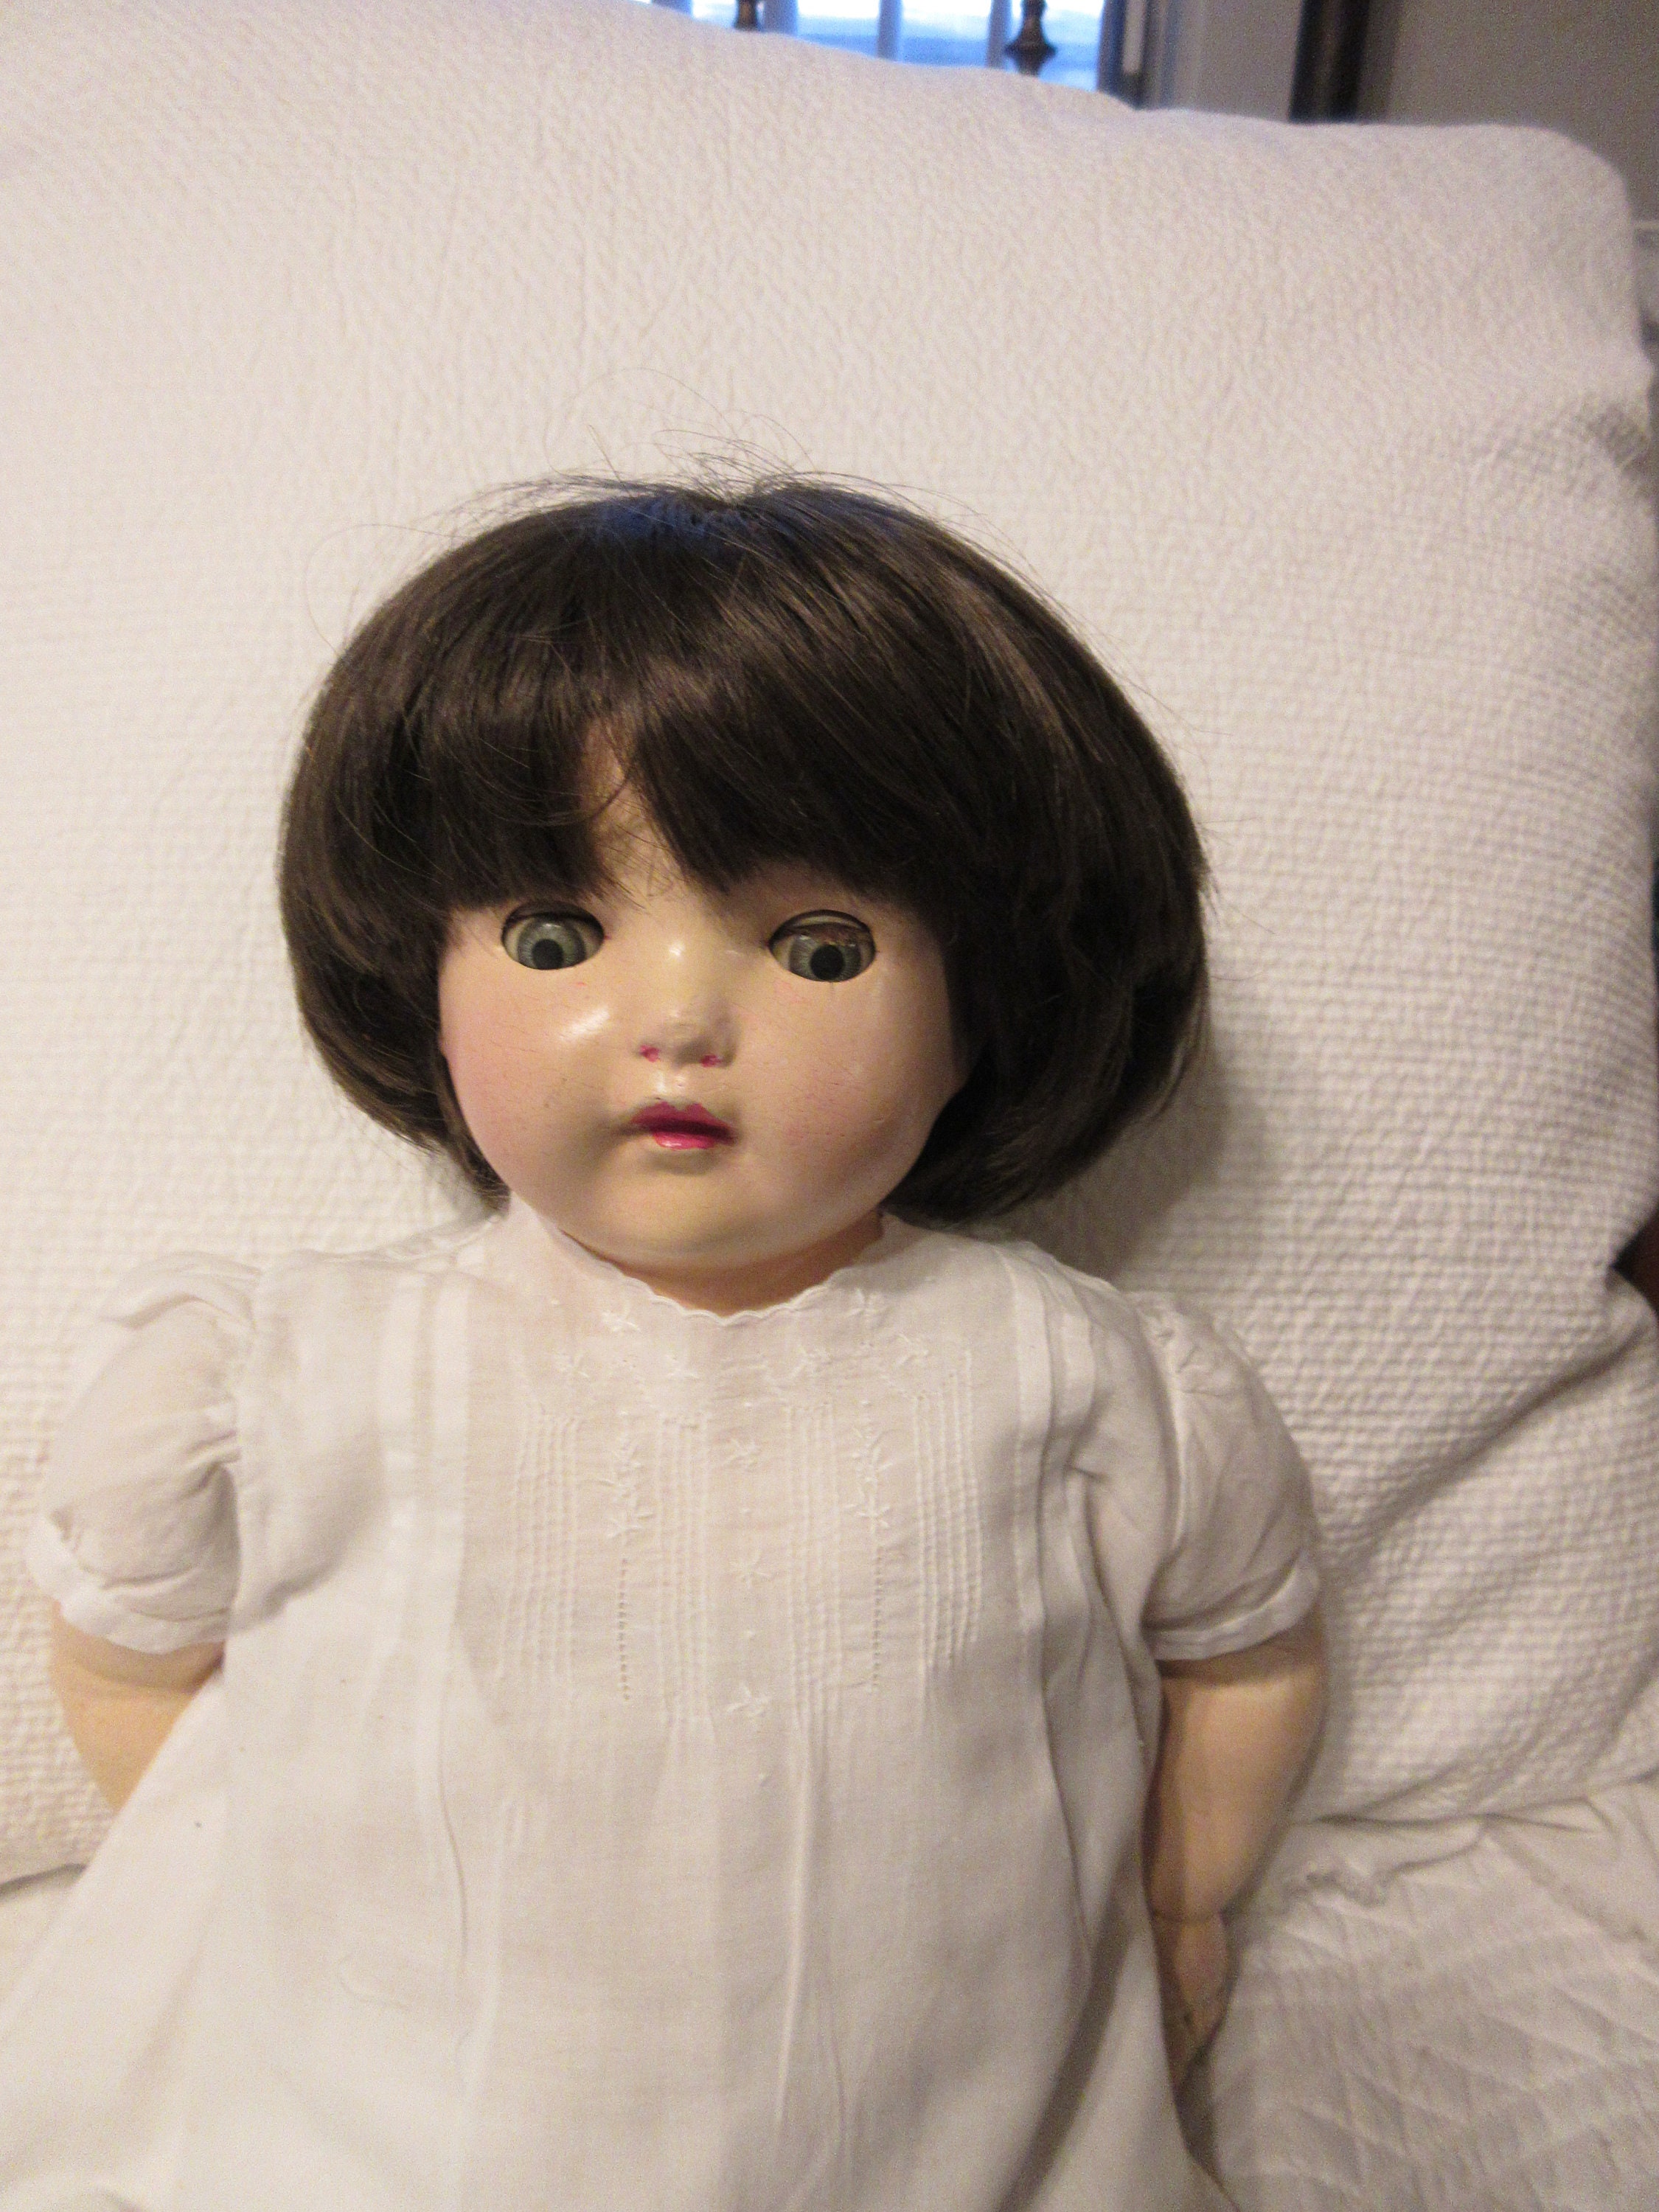 Doll Lover Arranbee Rosemary 1930's Composition Doll Collector Antique Doll